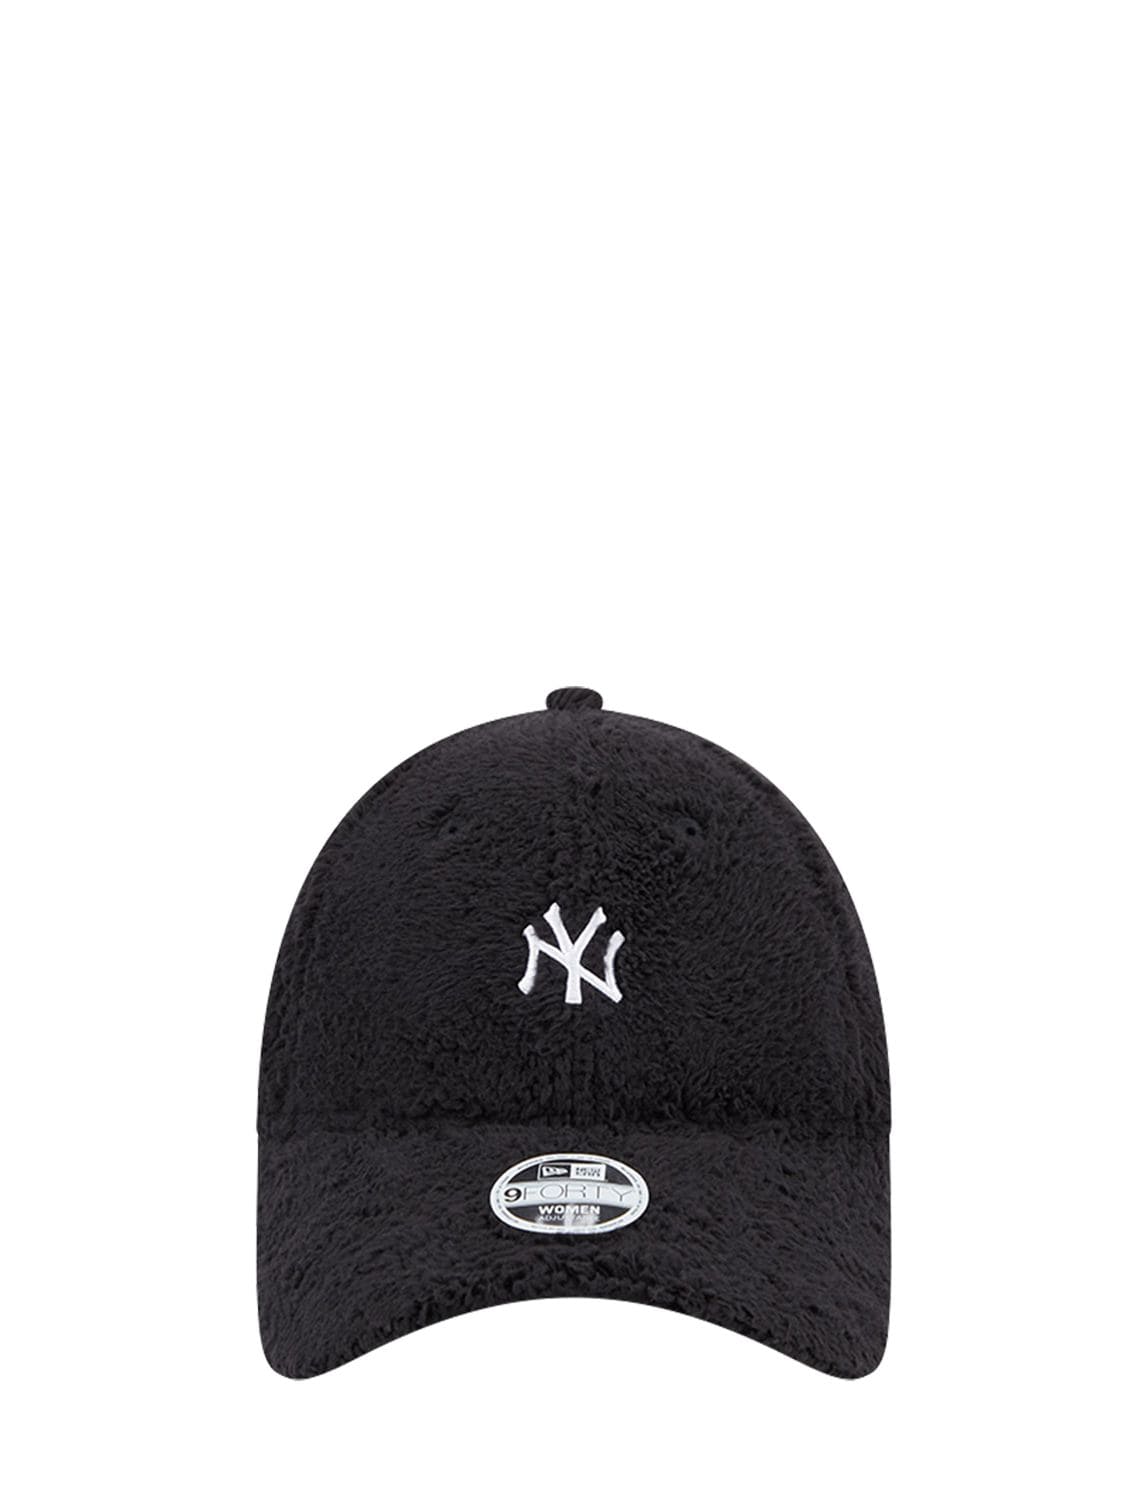 Image of Teddy 9forty New York Yankees Cap